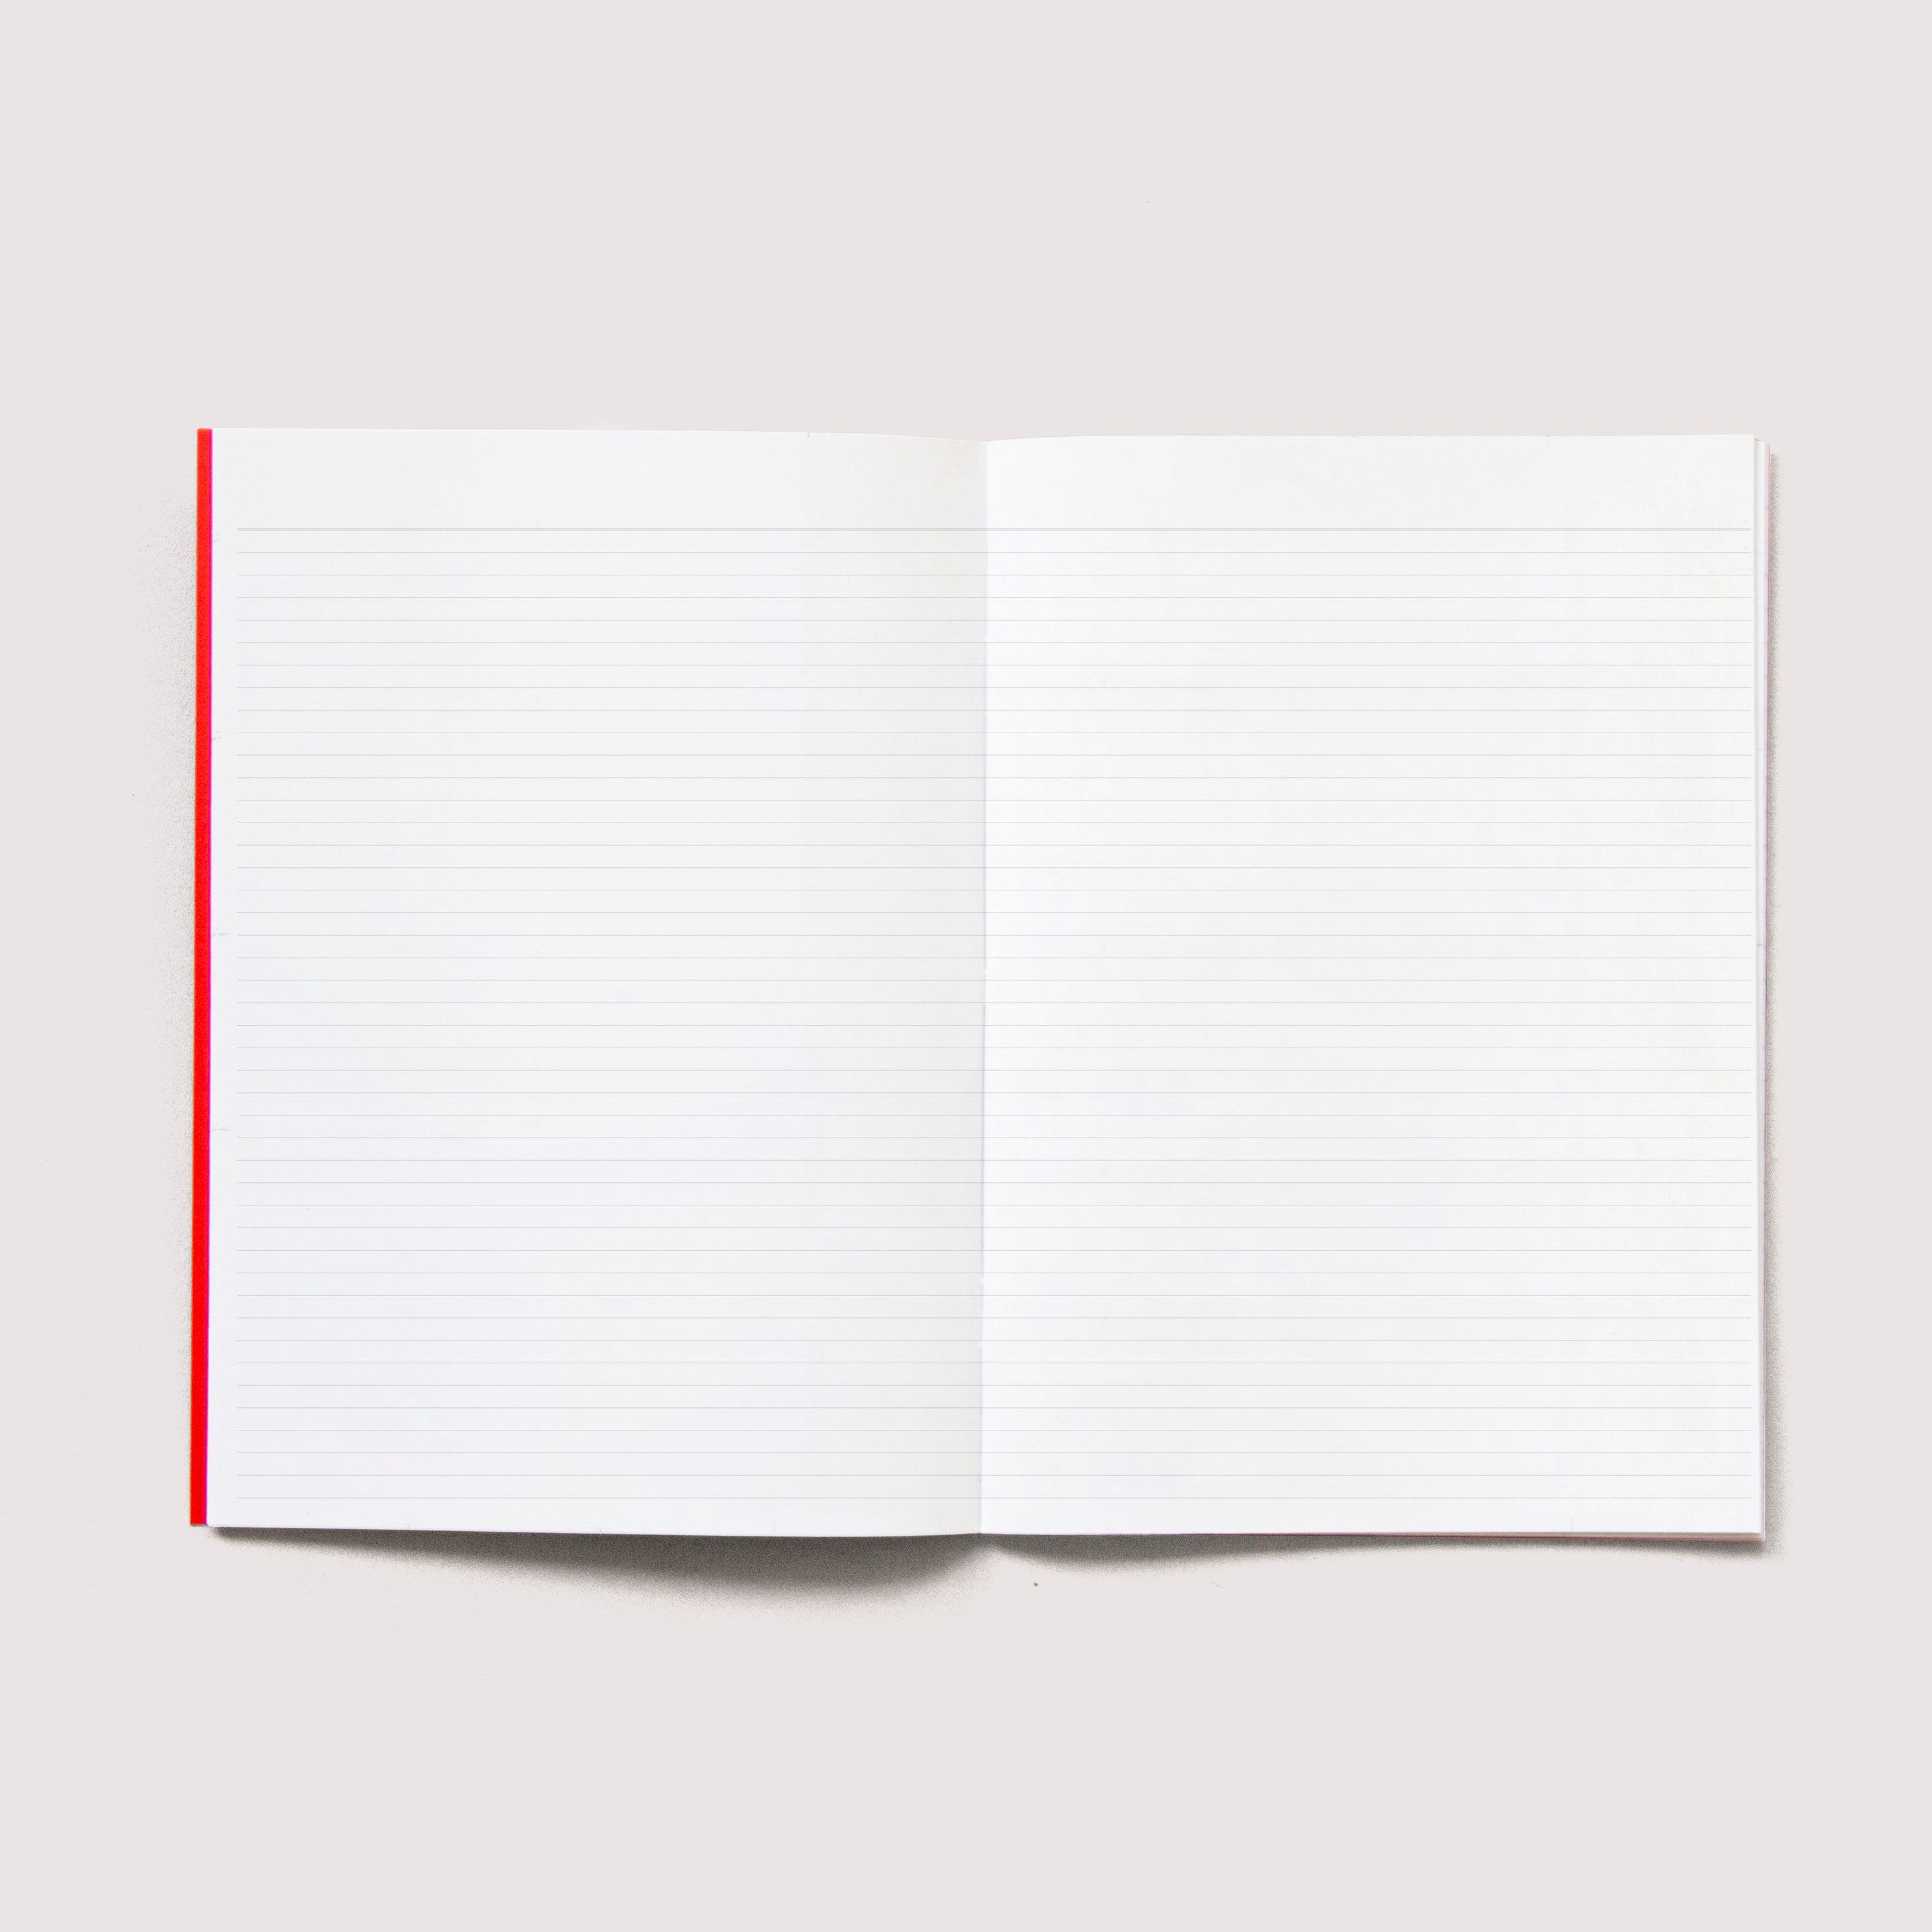 OCTÀGON DESIGN | Open "Sep23 to Aug24" Academic monthly planner. Lined pages for notes.